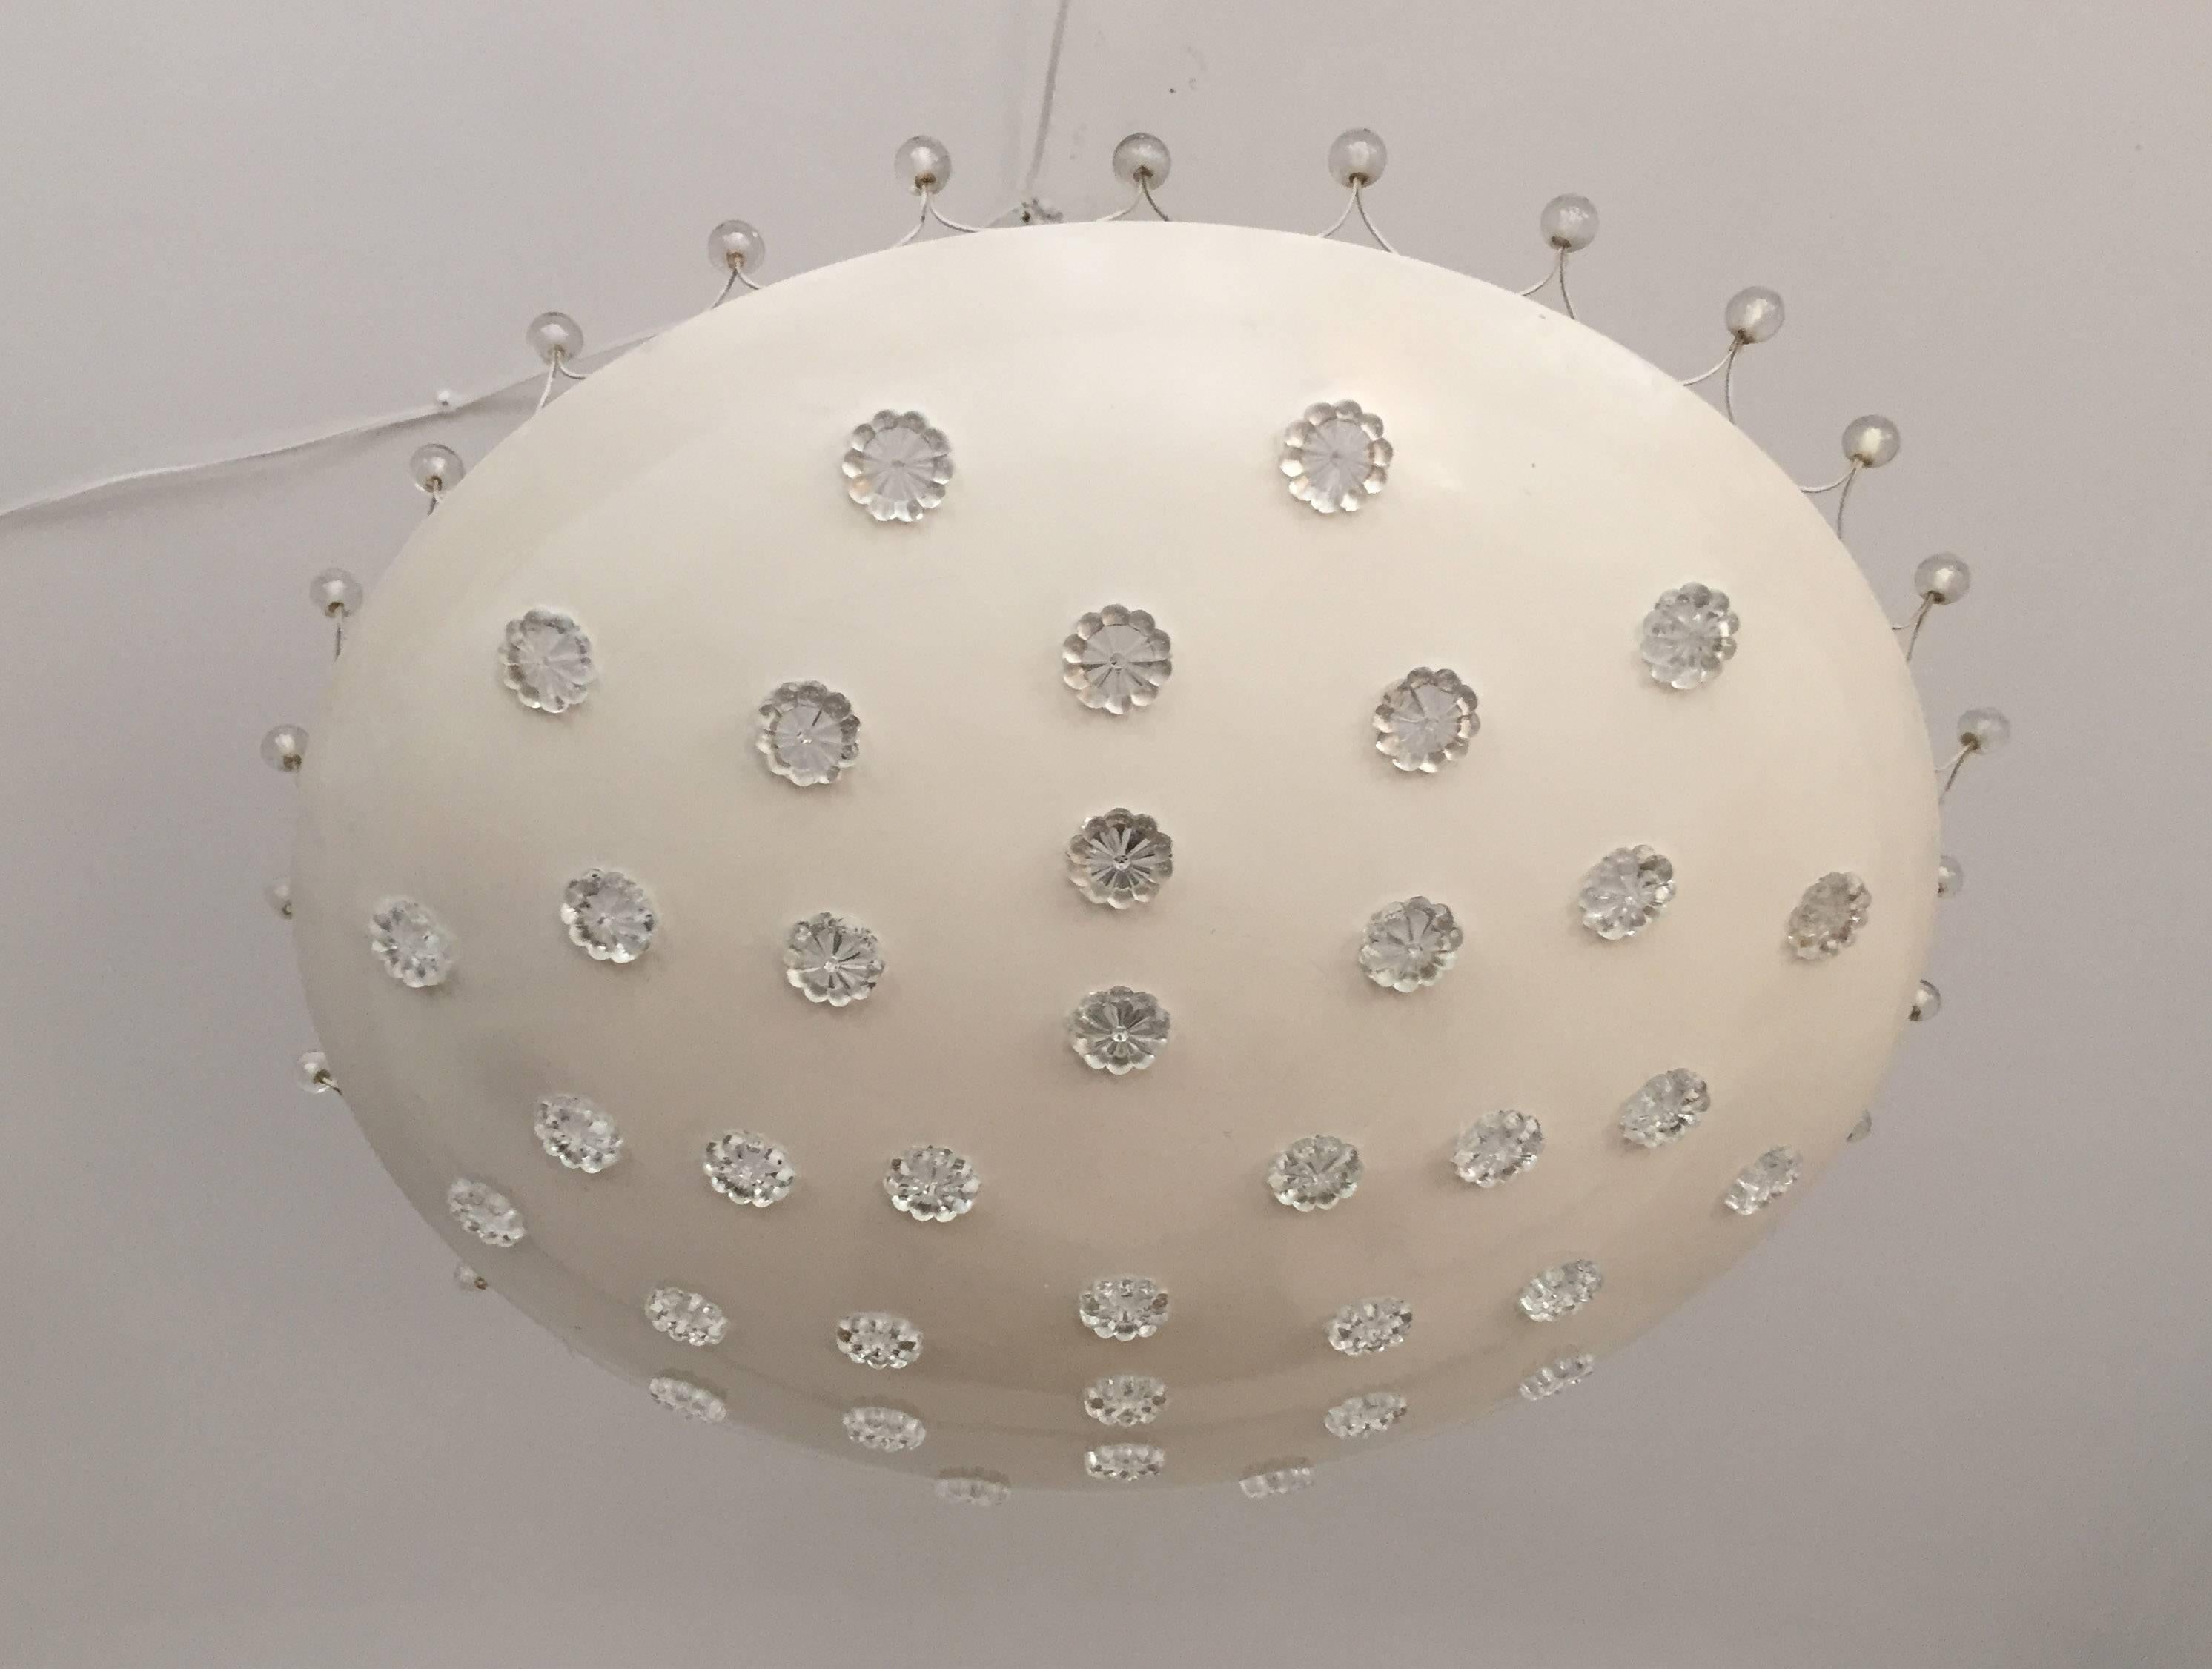 Steel lacquered with glass blossoms and pearls. Designed in the 1950s in Vienna by Emil Stejnar for Rupert Nikoll. Fitted with four E27 up to 100W sockets. This is the biggest one of the kind with 60cm (24